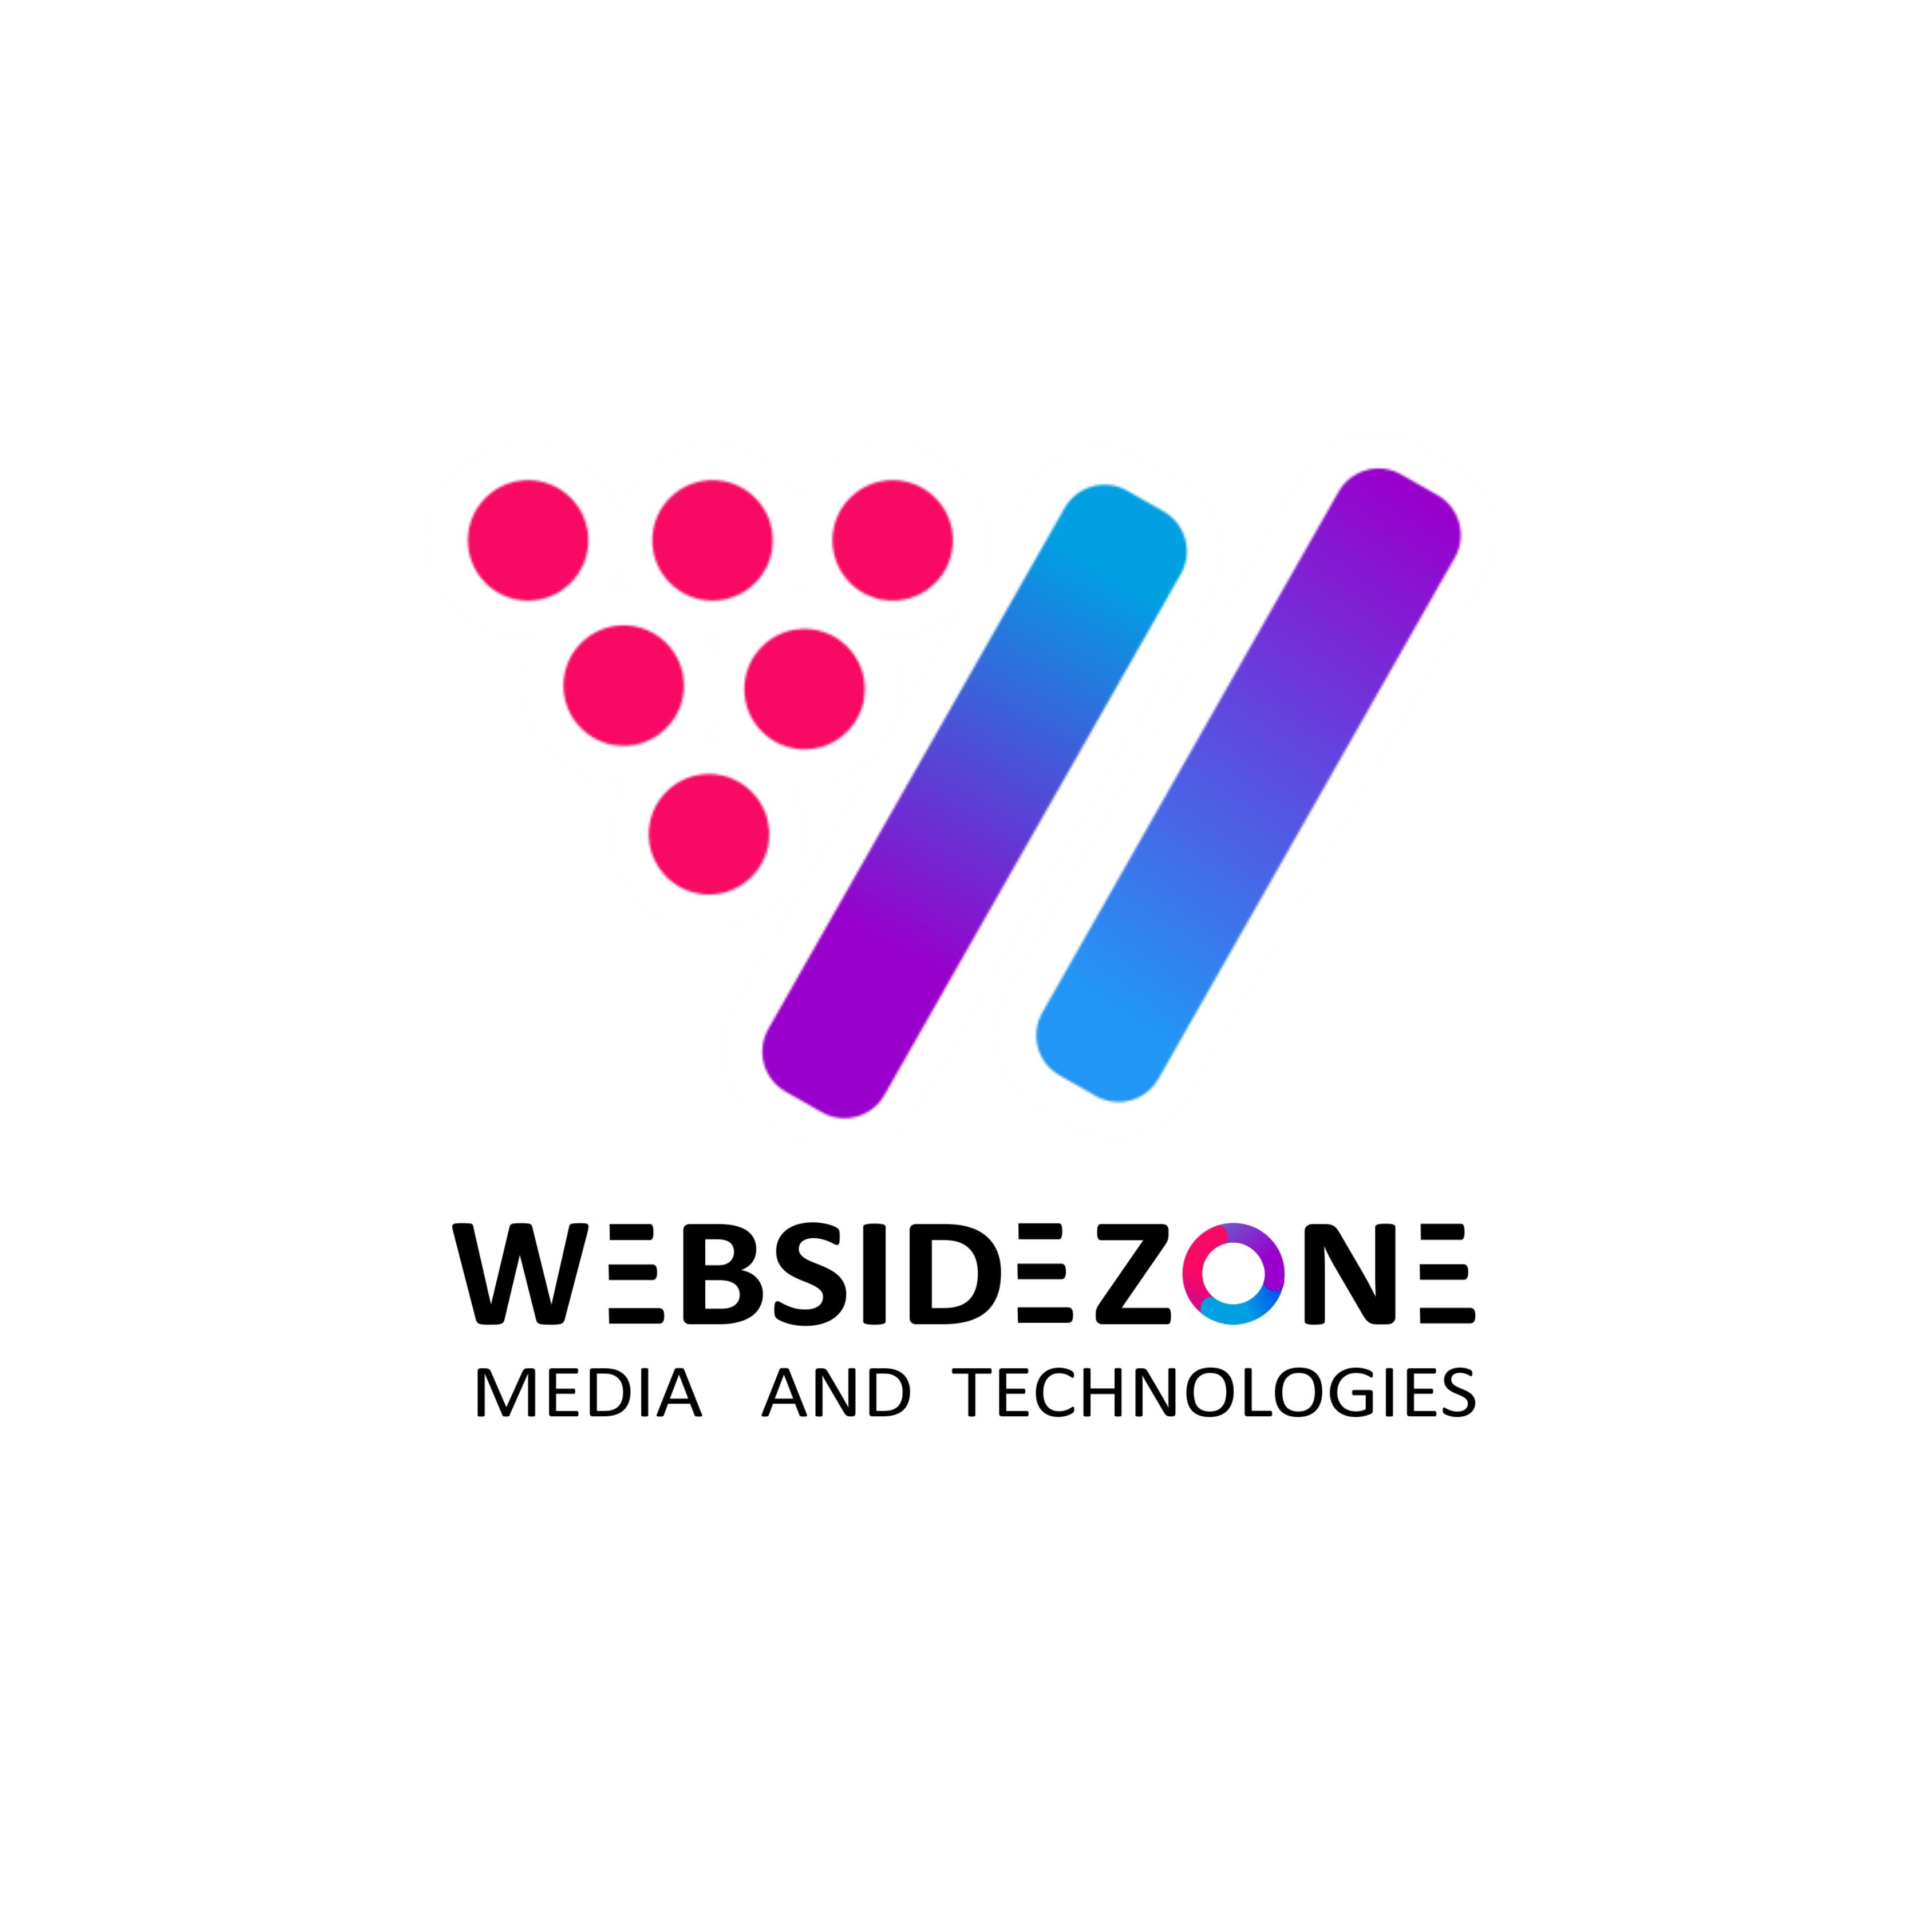 Websidezone Is A leading Web Design Agency In New Delhi, India. We Develop Creative, flexible and affordable Websites For Small Businesses &  Public Figure.